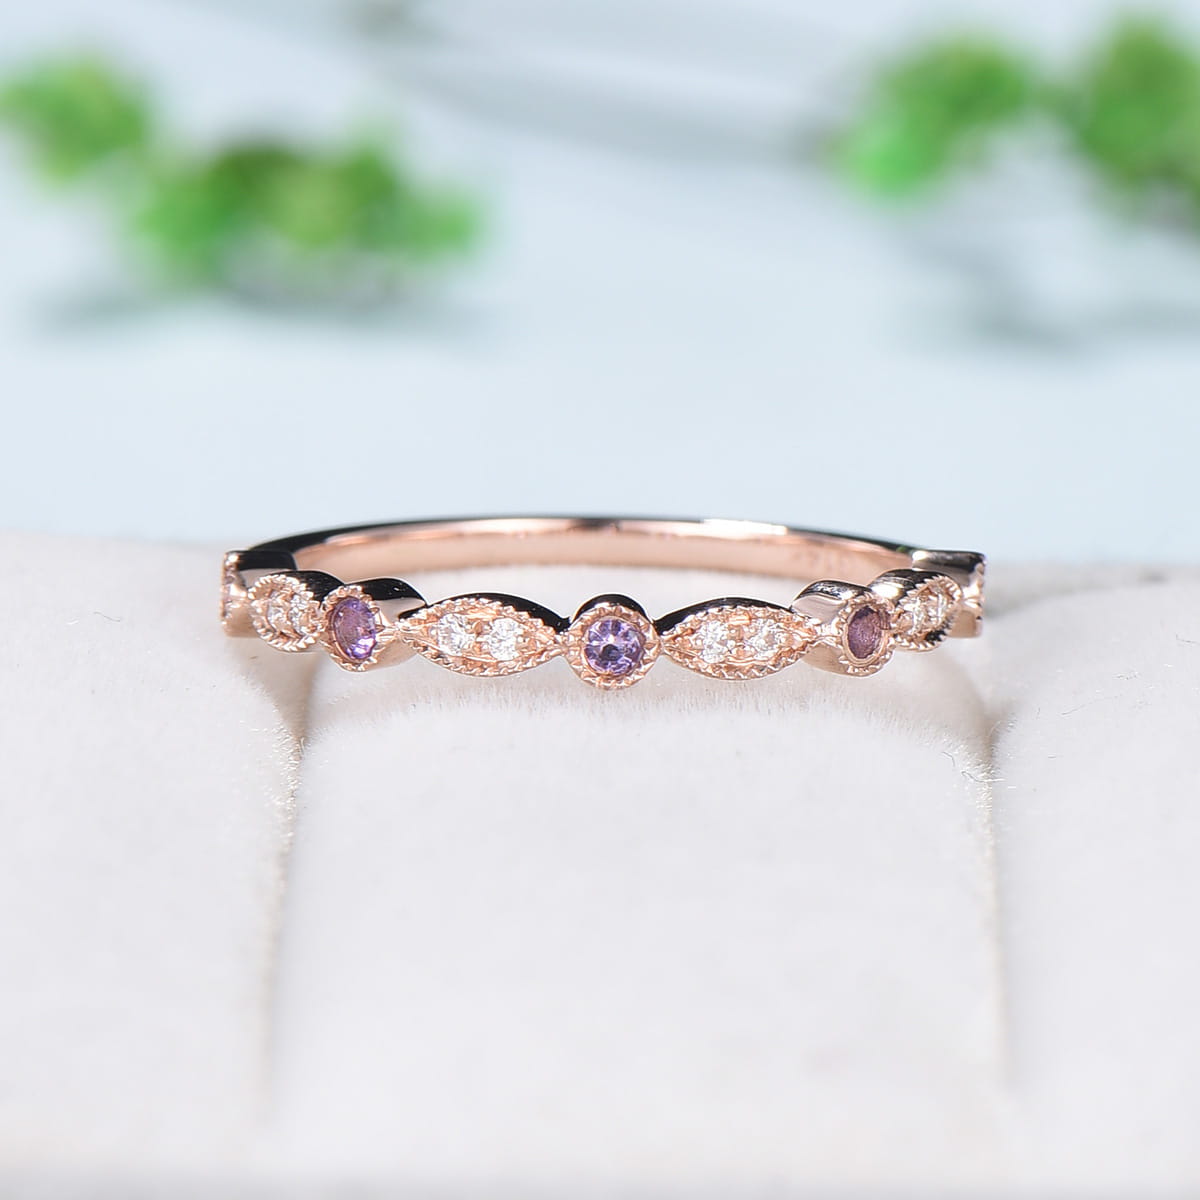 Vintage Amethyst Diamond Wedding Band Rose Gold Half Eternity Milgrain Stacking Band Anniversary Ring Matching Band Art Deco Marquise Ring - PENFINE